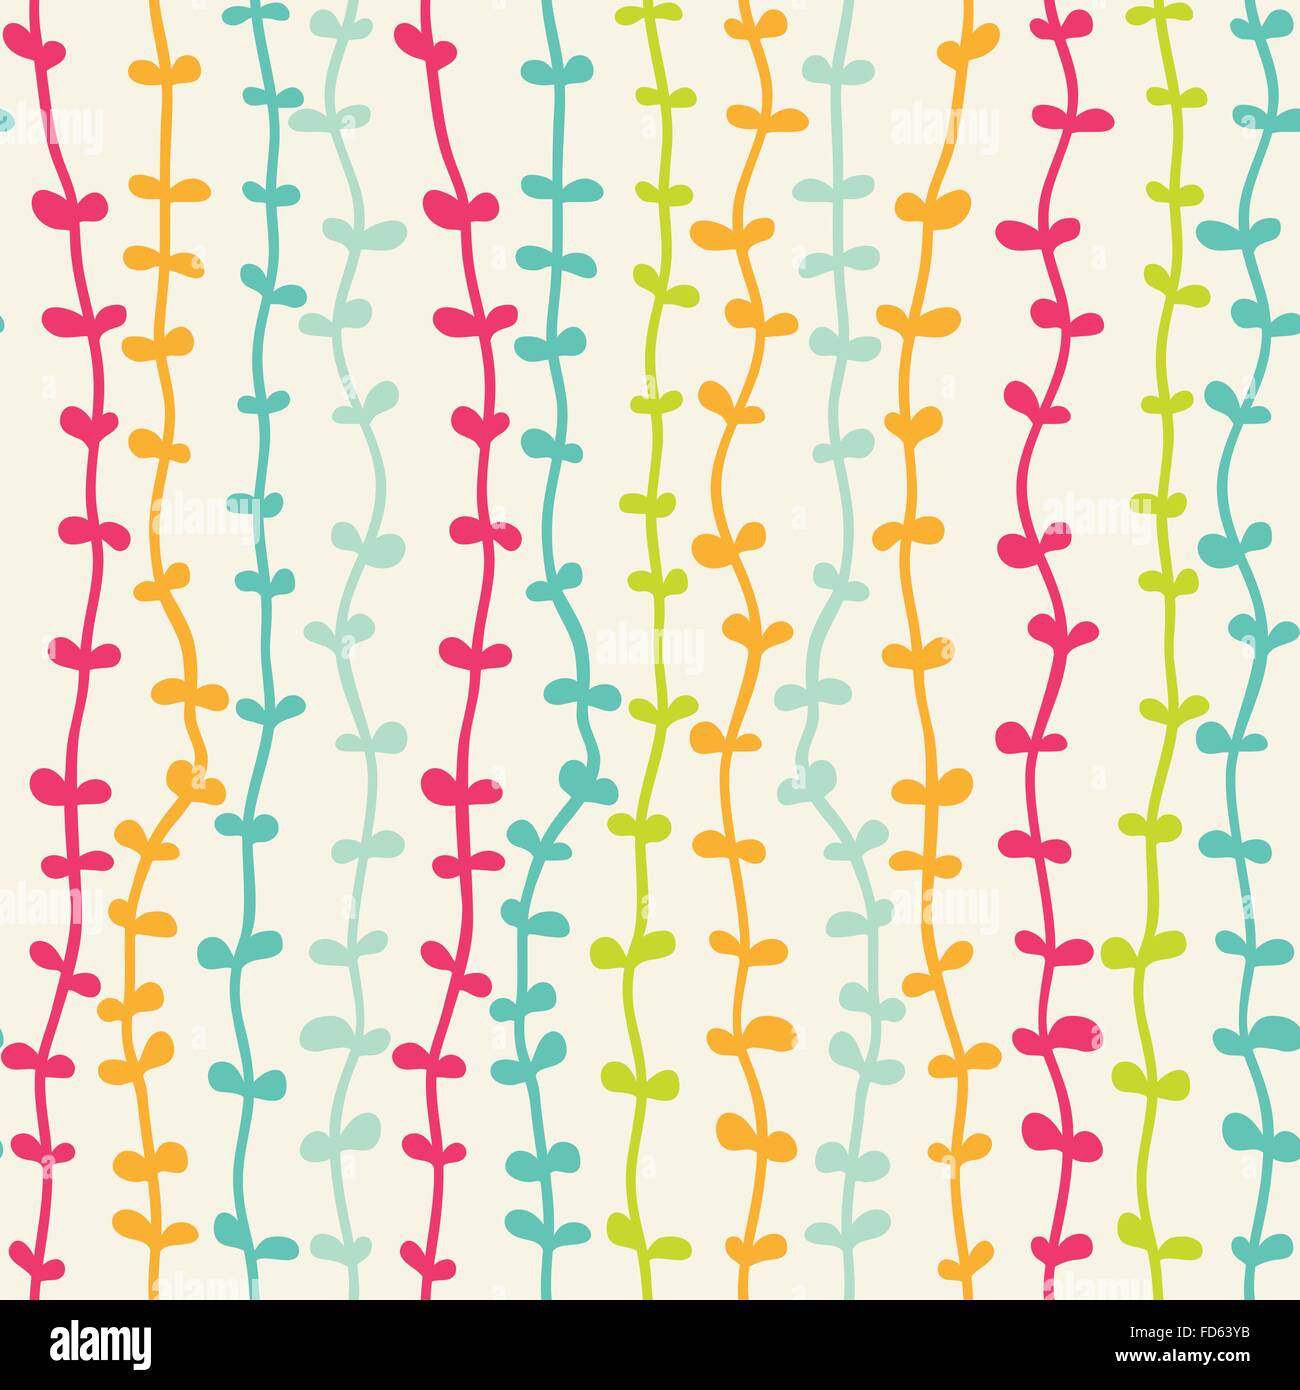 Endless seamless pattern with lines and leaves. Vector illustration. Stock Vector